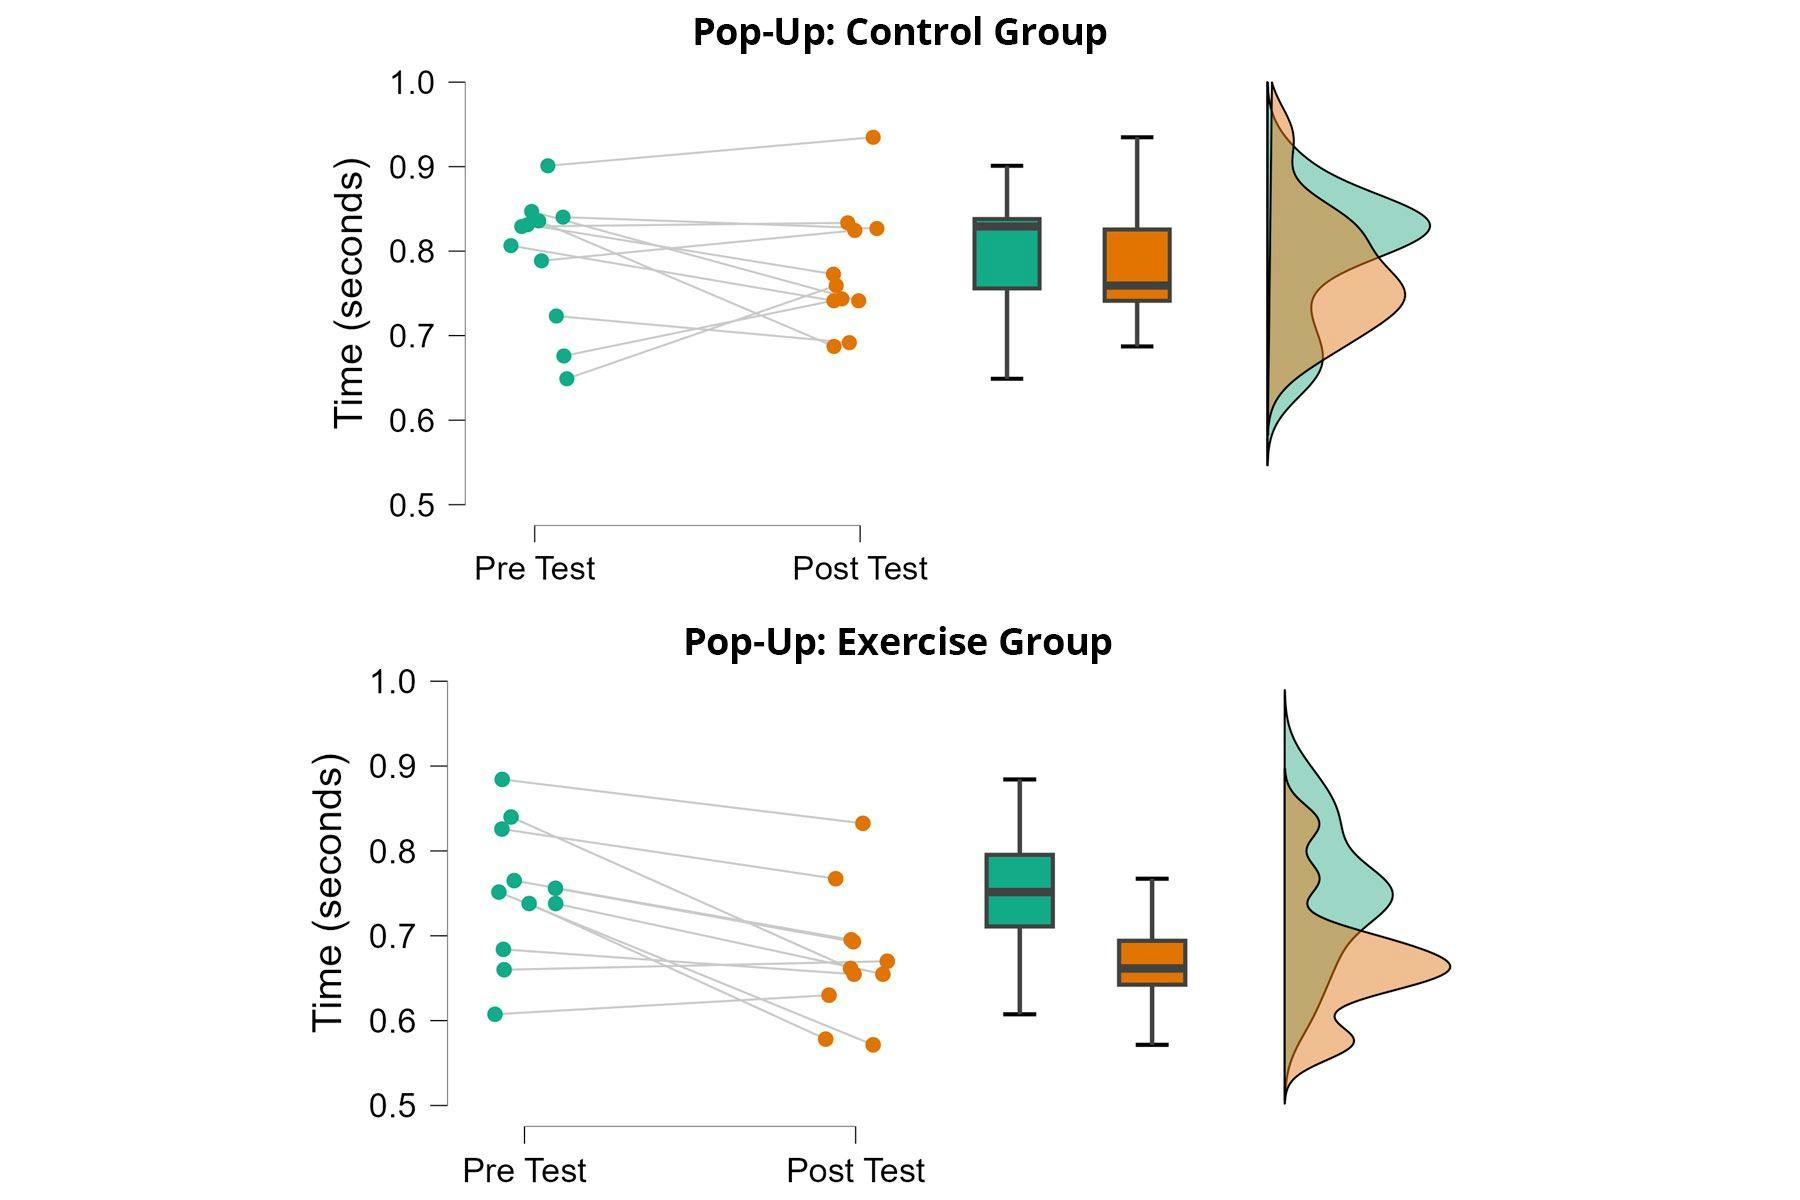 figure showing the results of exercise on surfer pop-up versus control group